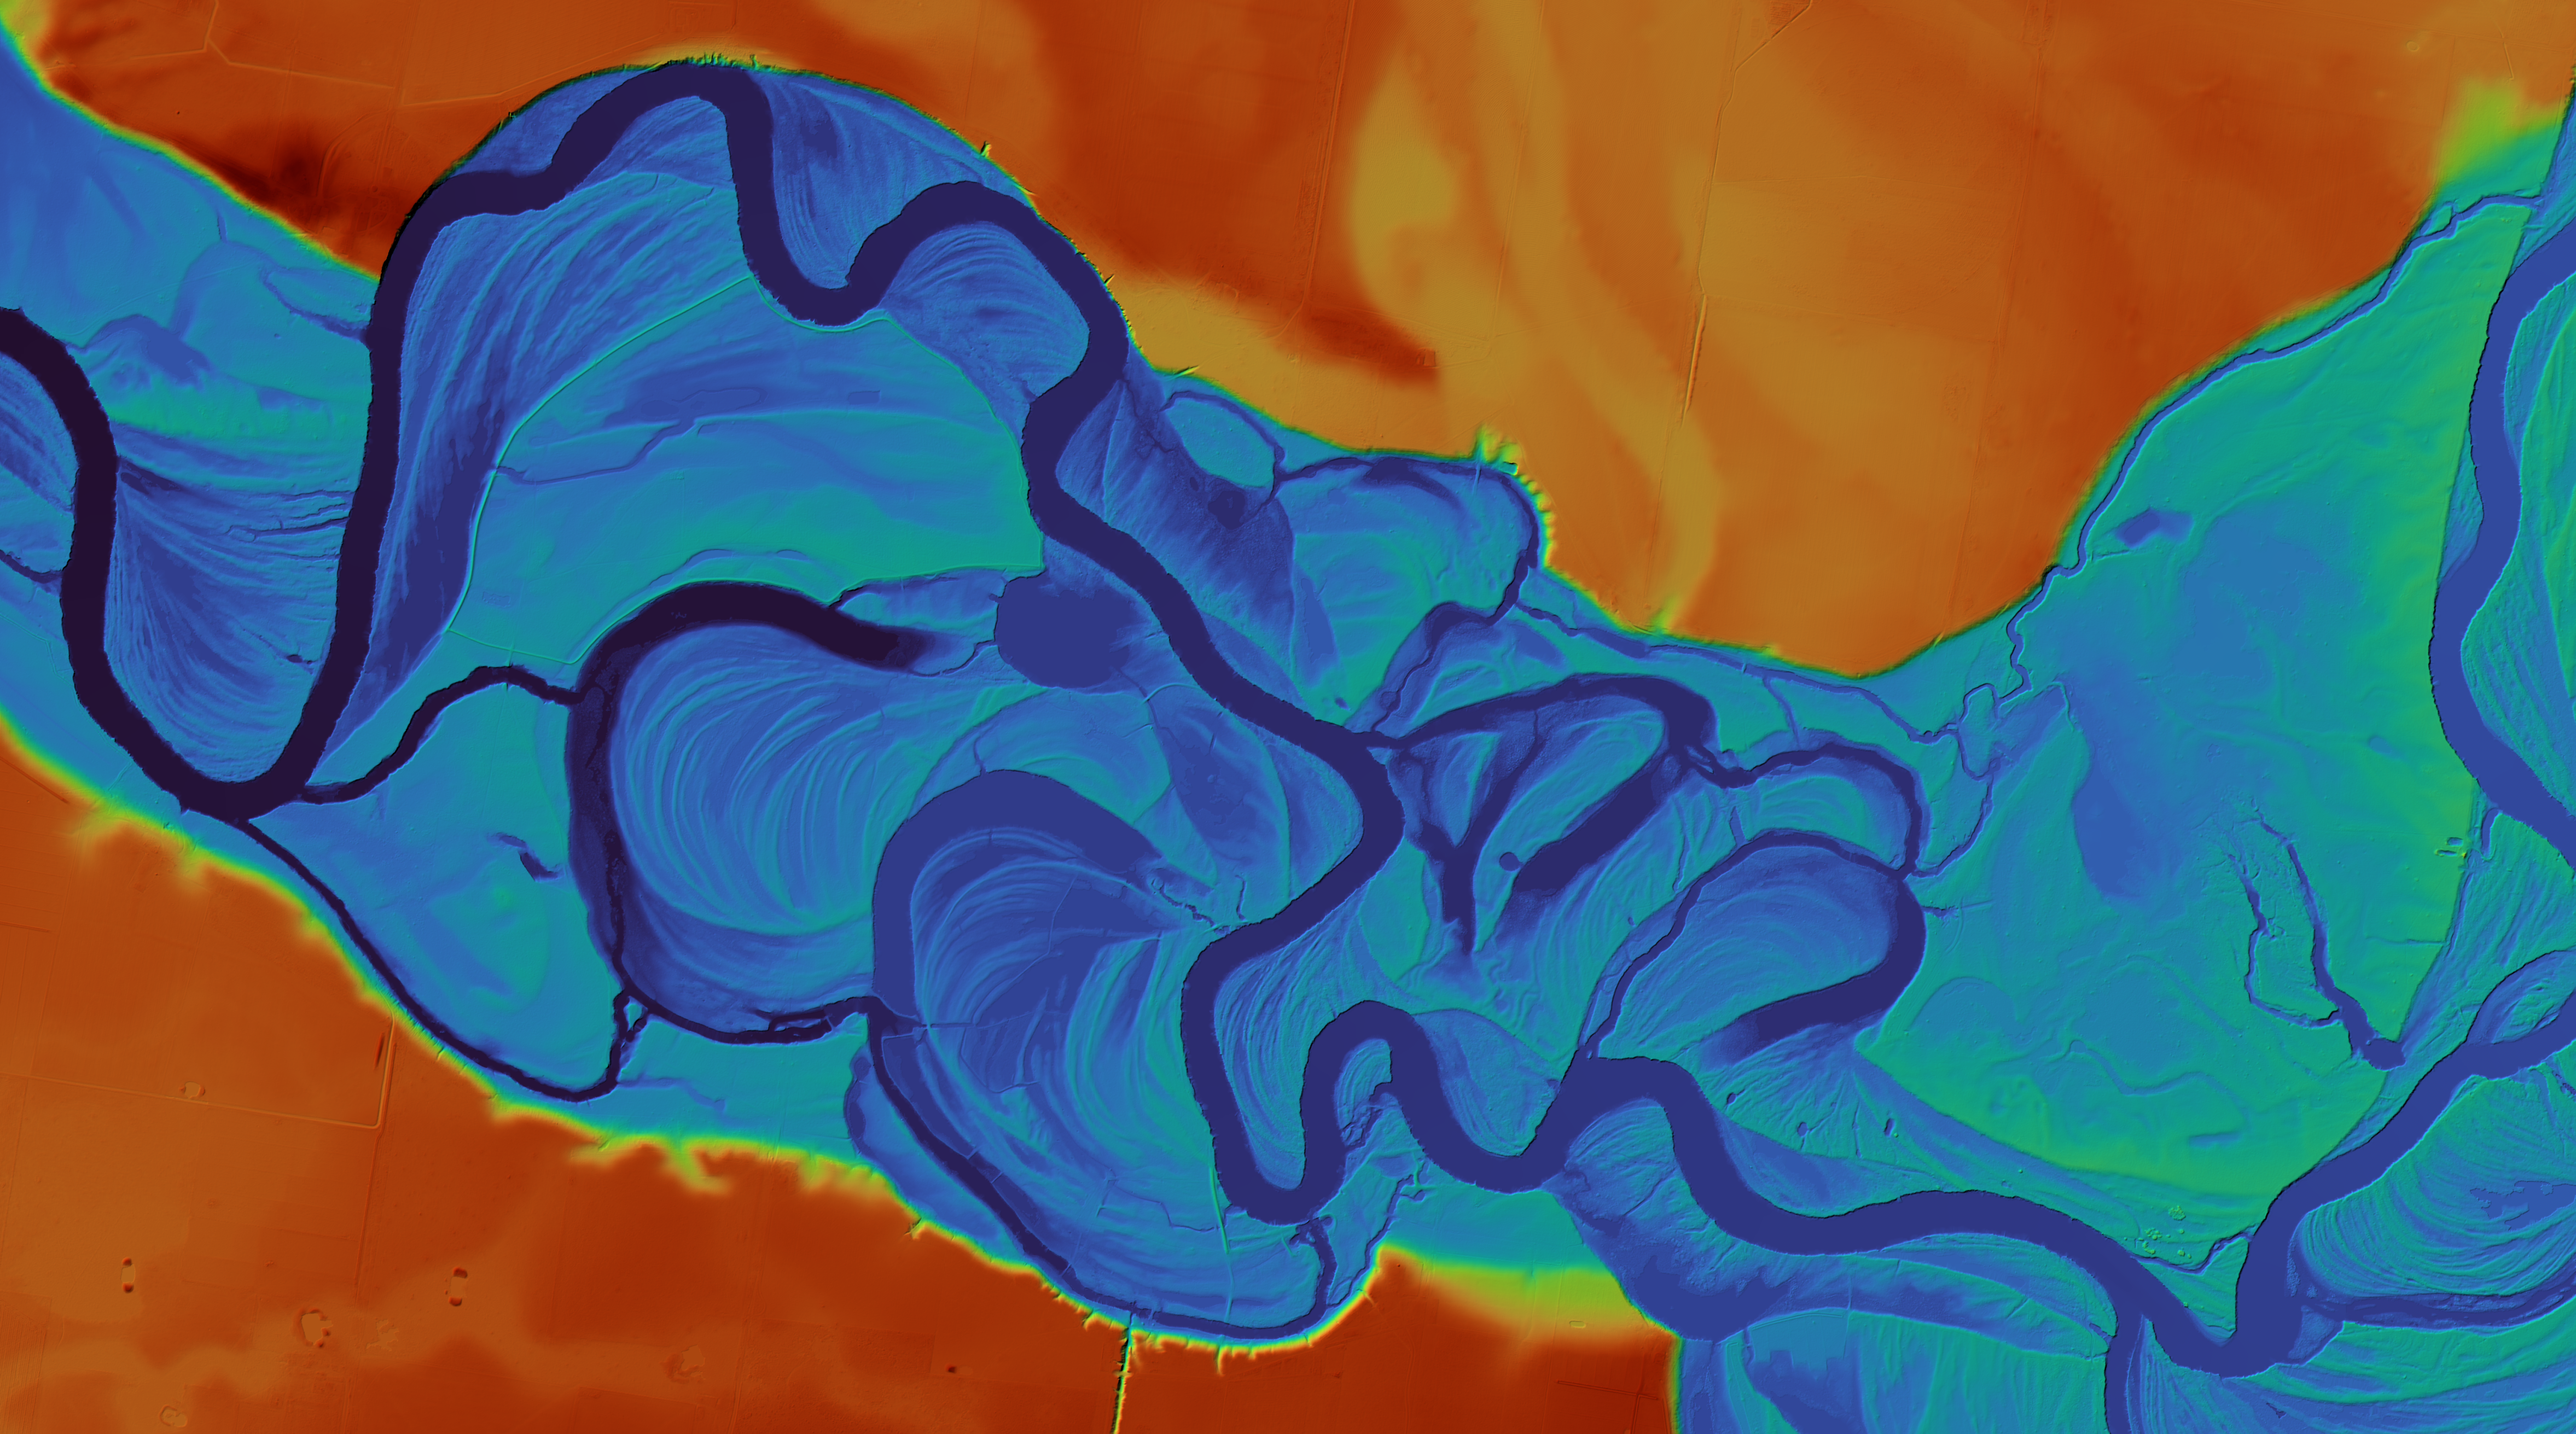 An aerial image of a portion of the Murray River using false colour to depict the depth of the waterway and height of land contours. The deepest points are shaded in blue, through shades of green, then yellow, then red for the highest points. The image shows the curves of the river wending back and forth across the landscape along with floodplains.